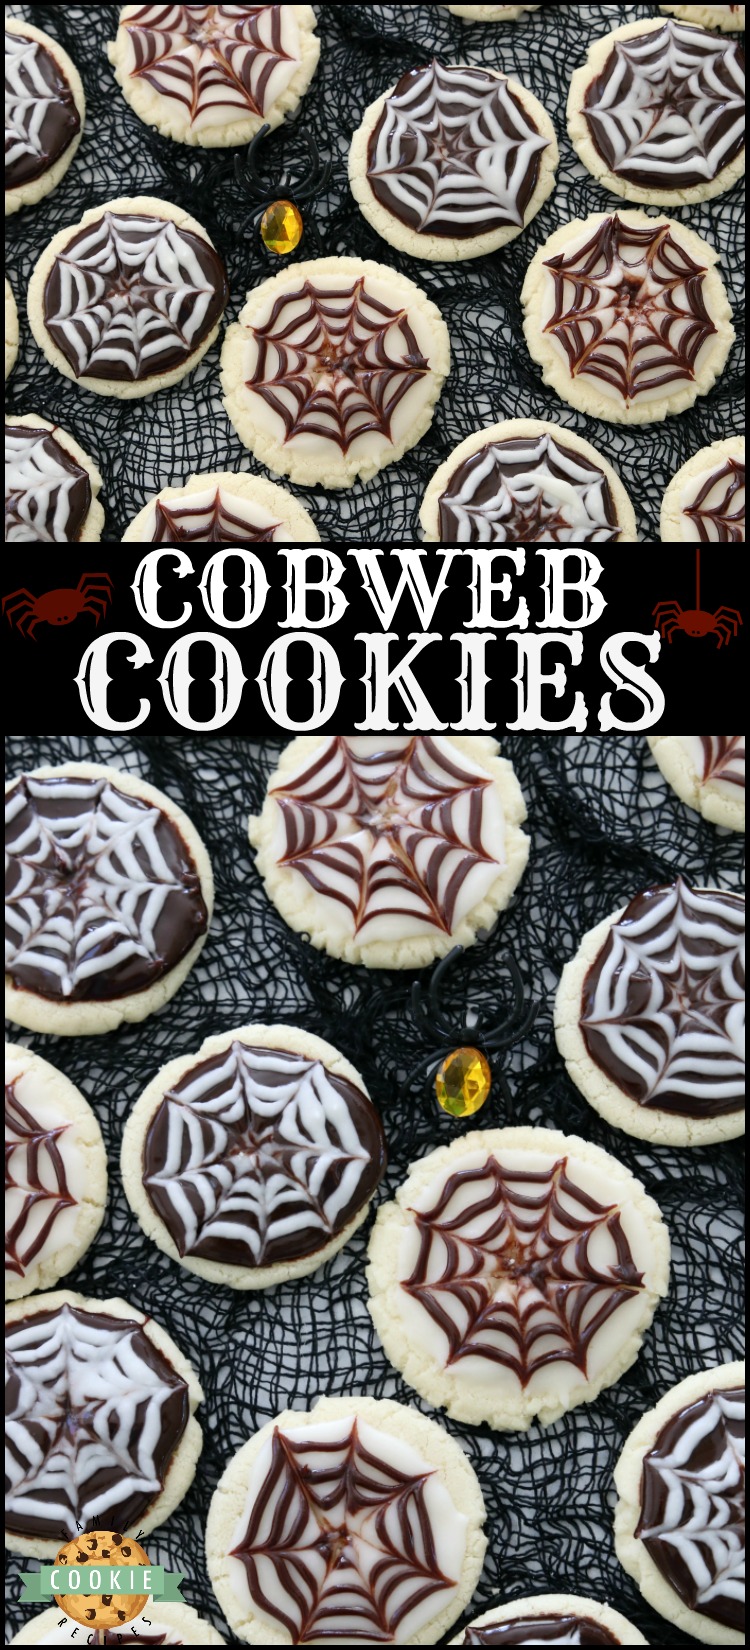 Halloween Cobweb Cookies are spectacularly spooky and completely delicious! Sugar cookies topped with chocolate & vanilla icing- no coloring! Quick & easy spider web design made in seconds. Perfect Halloween treats! #cookies #frosting #halloween #baking #trickortreat #dessert FAMILY COOKIE RECIPES